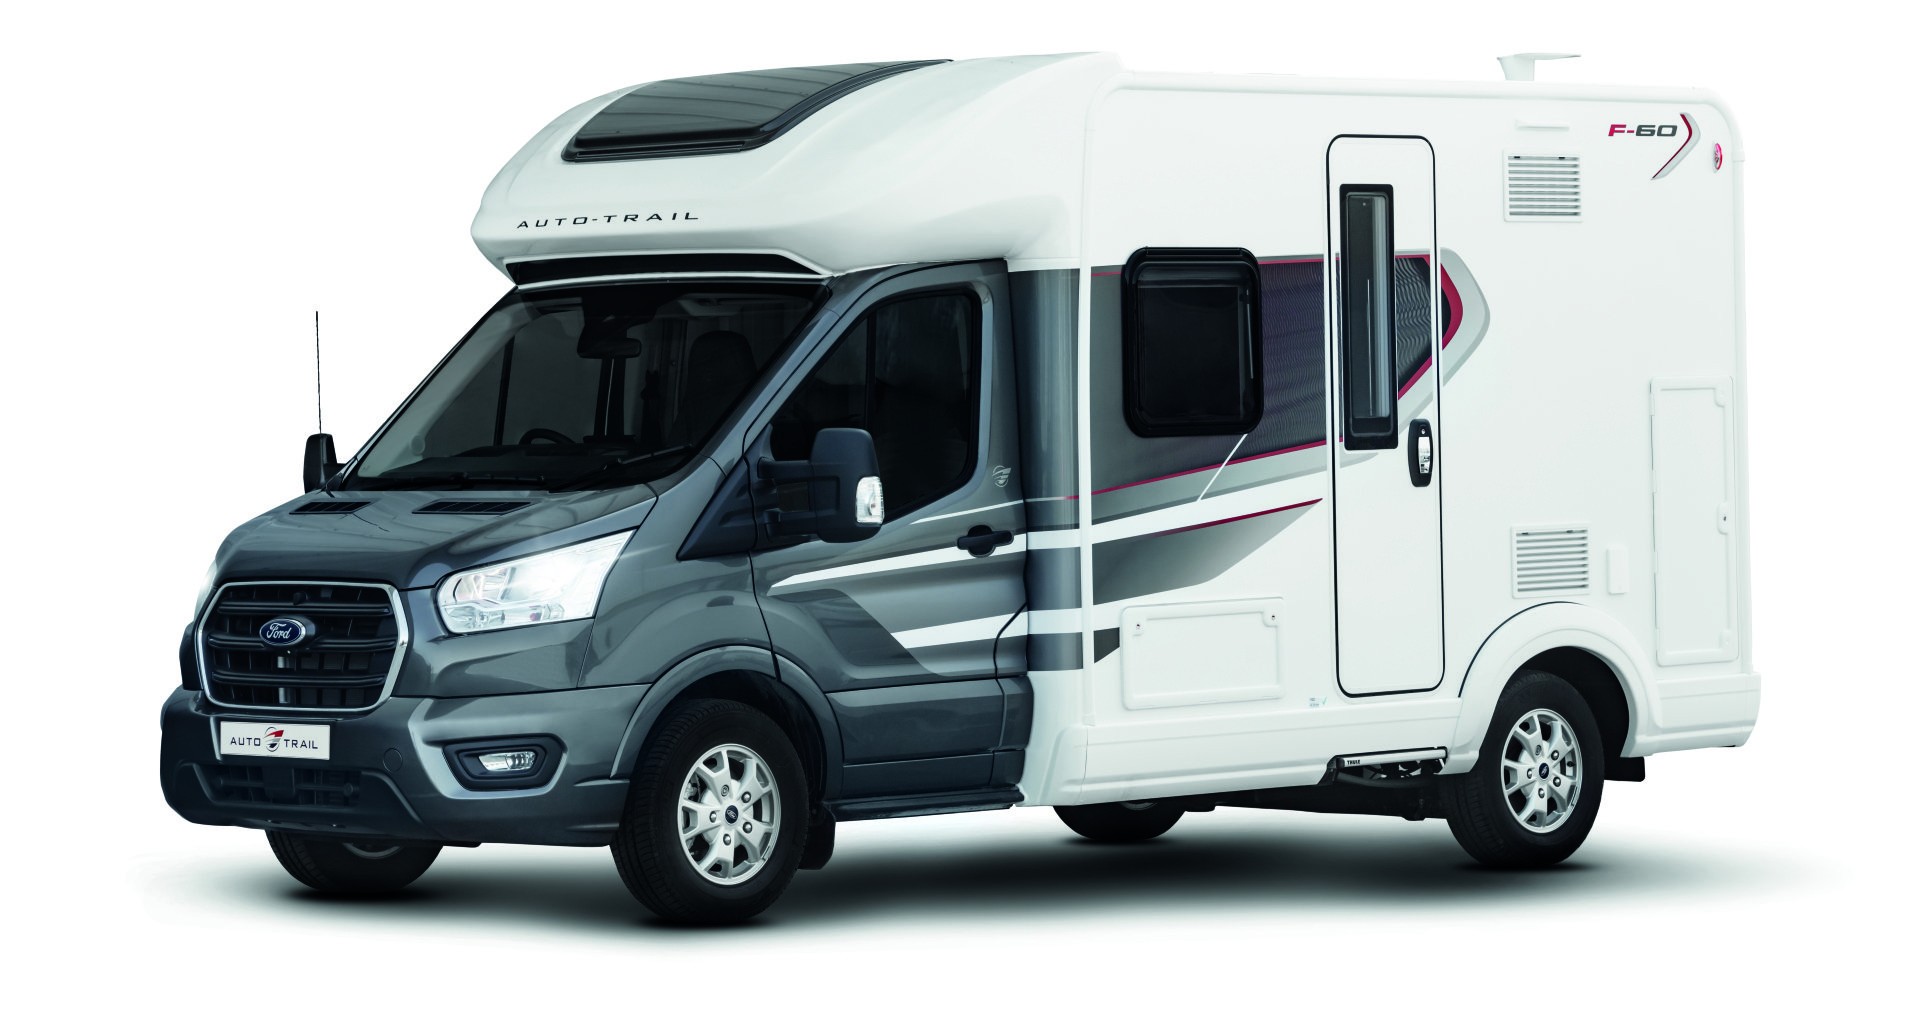 used motorhomes for sale, second hand, 2 berth auto tribute, 670, 2014